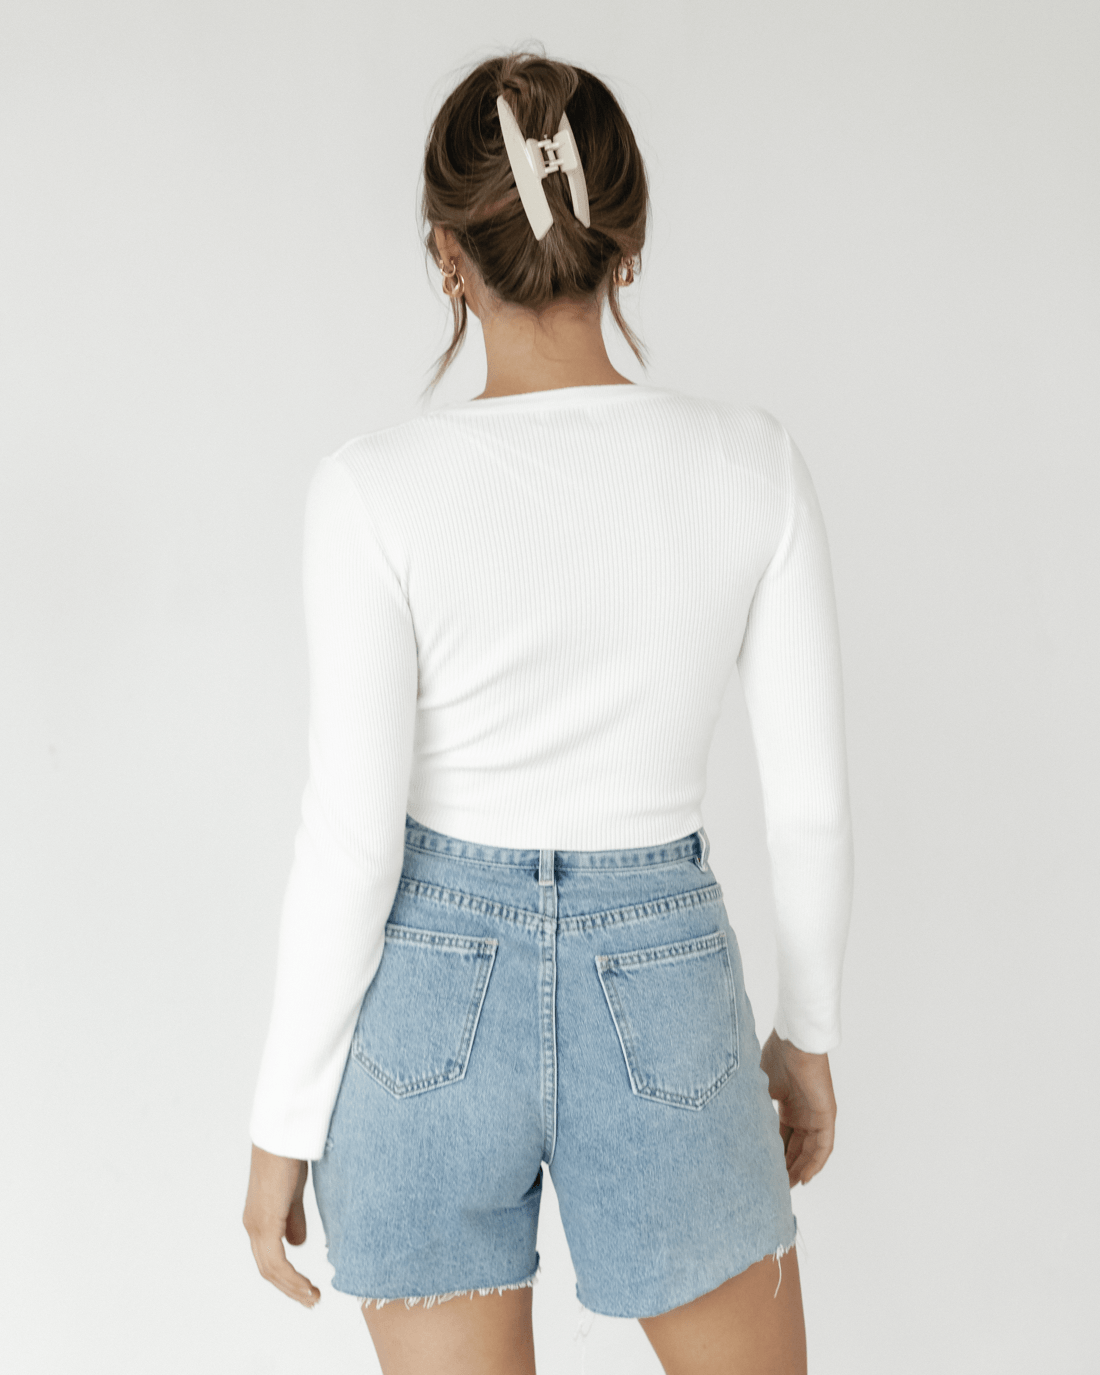 Soma Knit Long Sleeve Top (White) - White Knit Long Sleeve Top - Women's Top - Charcoal Clothing